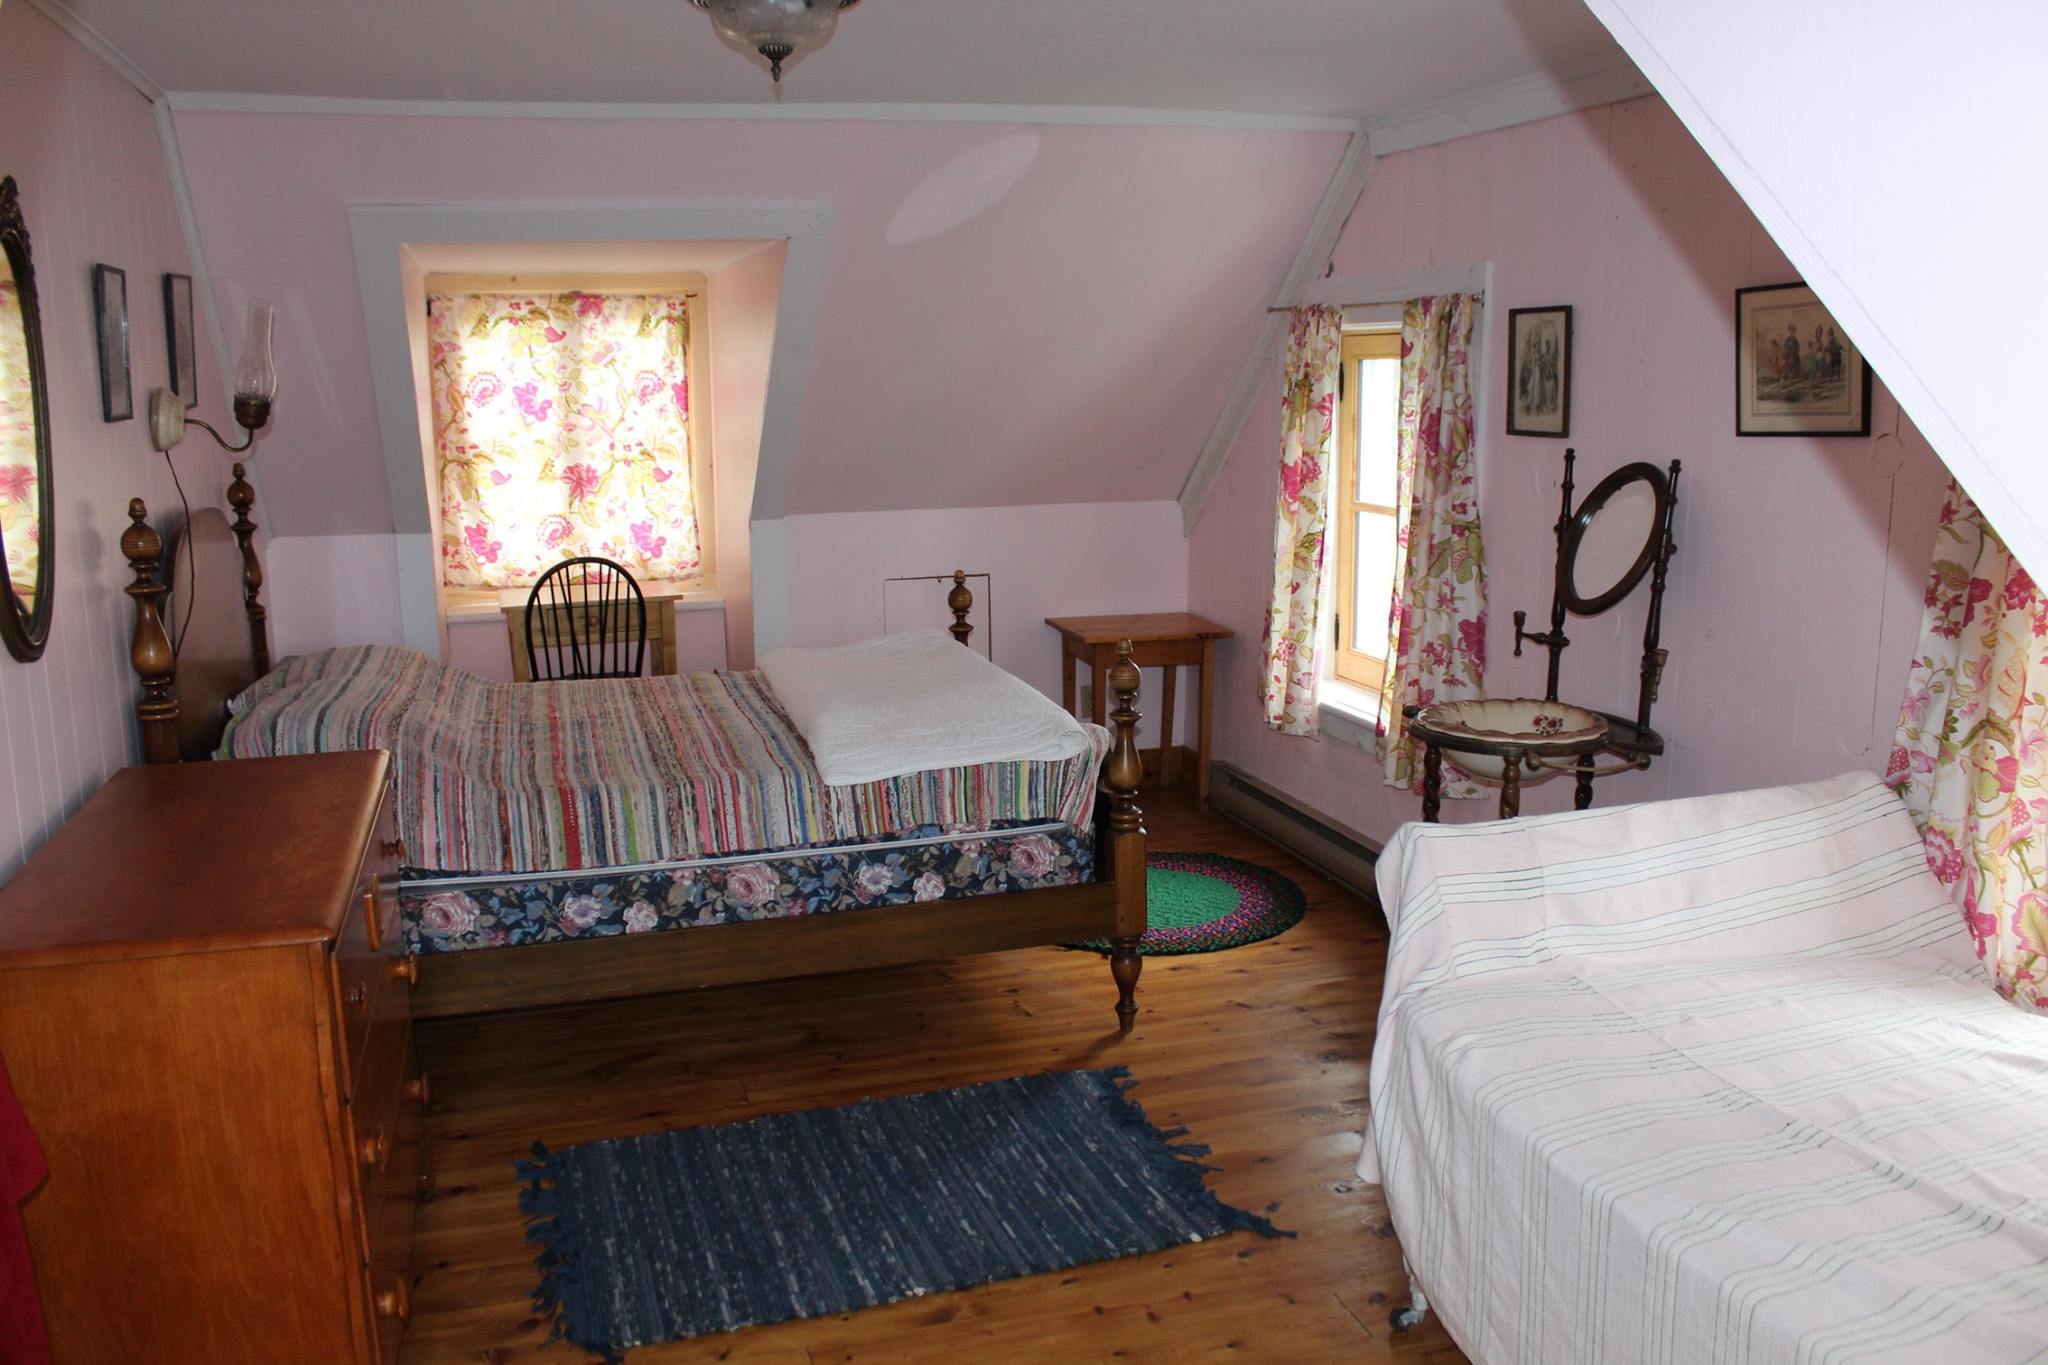 A colour photograph of a small bedroom with old-fashioned furnishings